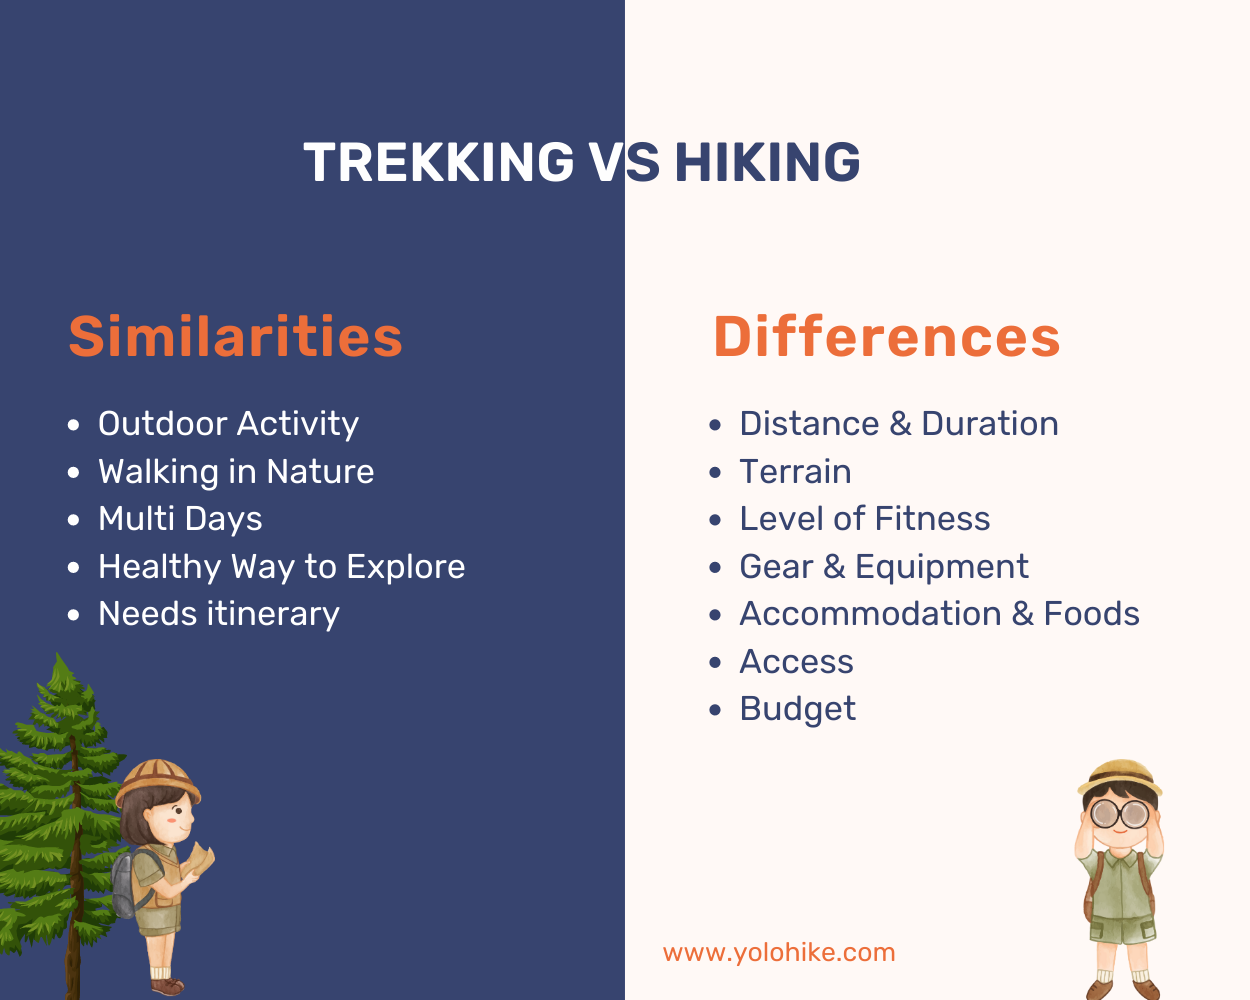 Similarities and differences of Trekking and Hiking